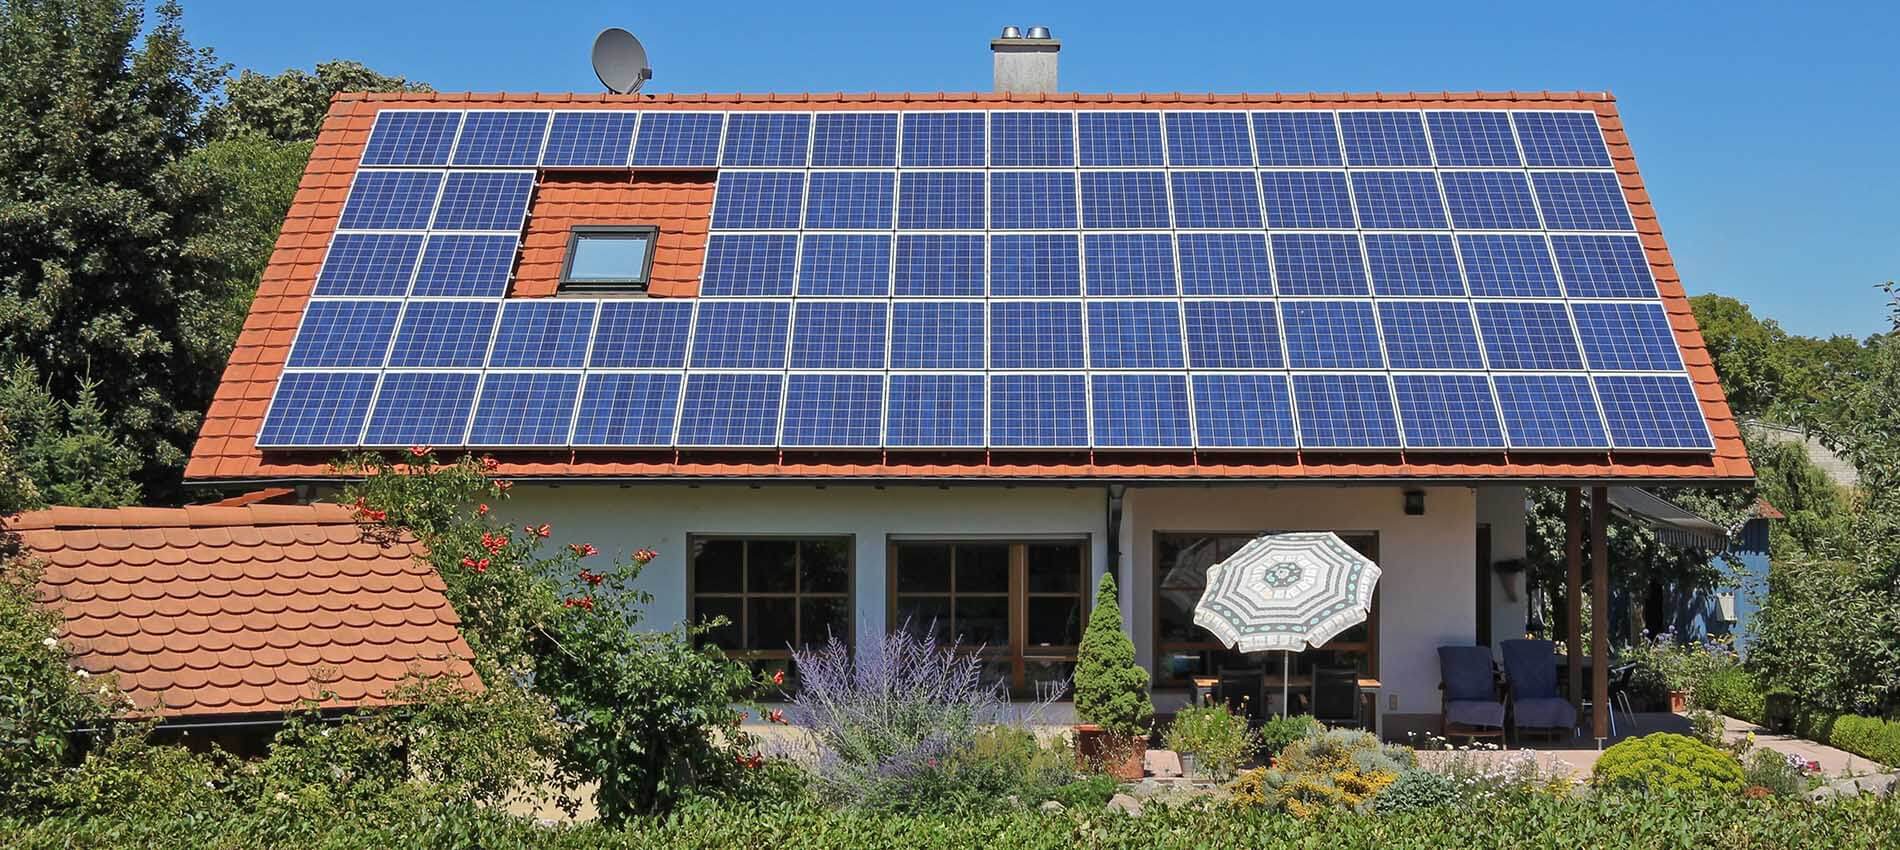 What are the Advantages of a Hybrid Solar System?